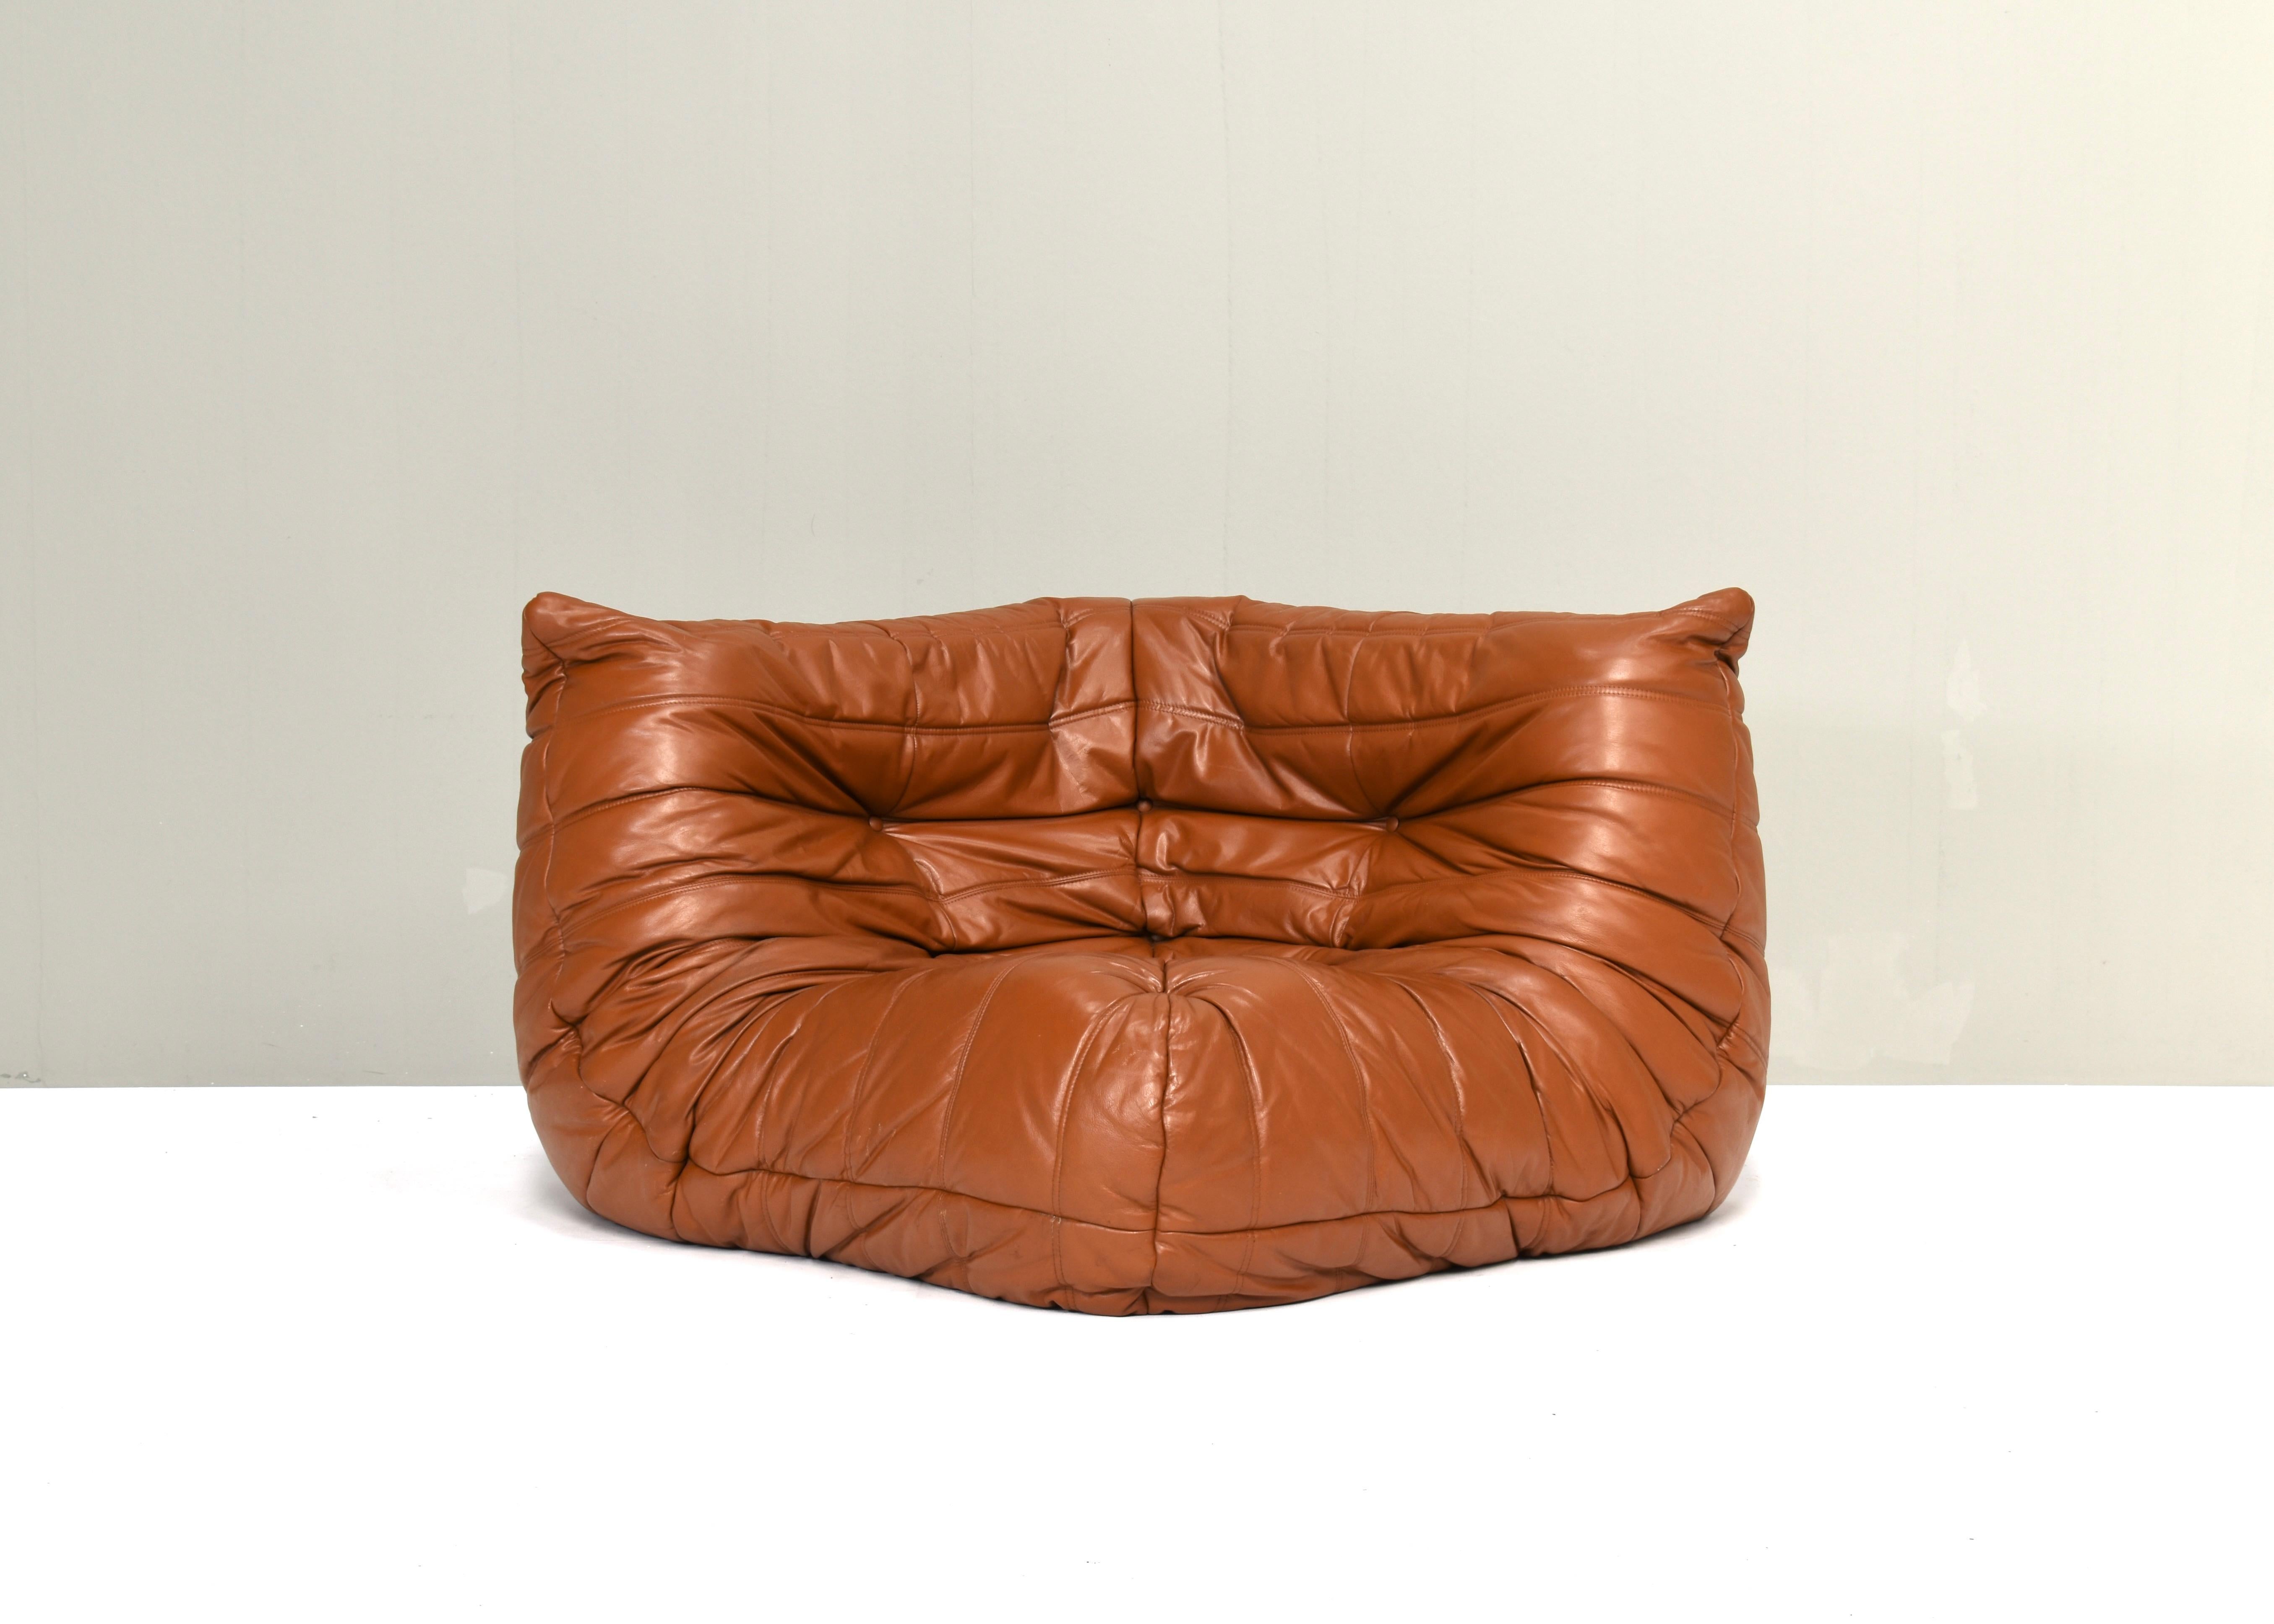 Togo corner sofa in tan leather by Michel Ducaroy for Ligne Roset, France – circa 1970.
The element is in good condition with some age and use related wear to the leather. See detail images. No tears or holes. The sofa has a label, the corner